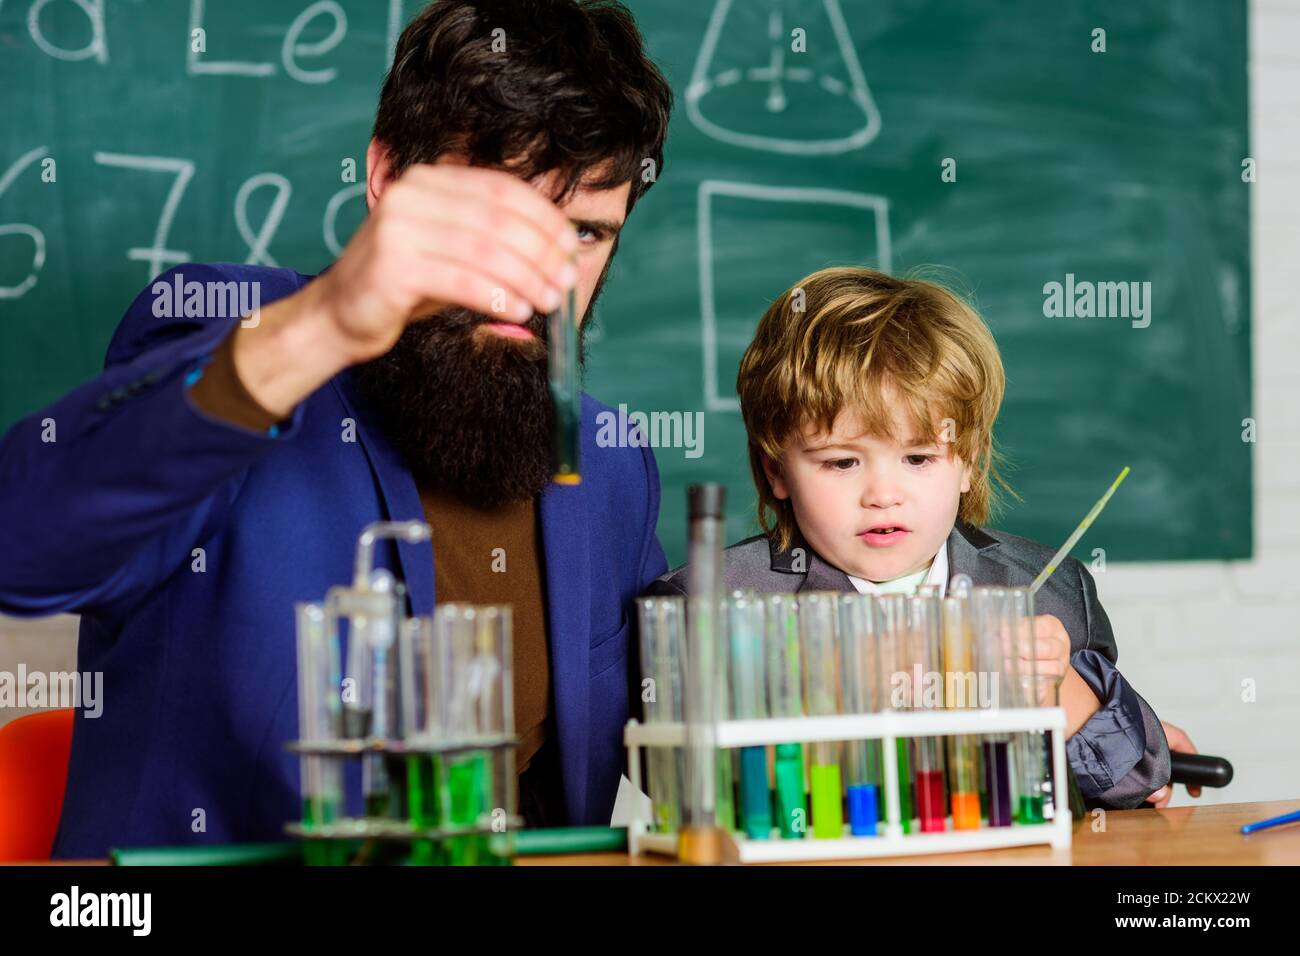 Teacher and child test tubes. School lesson. Perseverance pays off. Chemical experiment. Symptoms of ADHD at school. Educational school program. Schoolboy cute child experimenting with liquids. Stock Photo